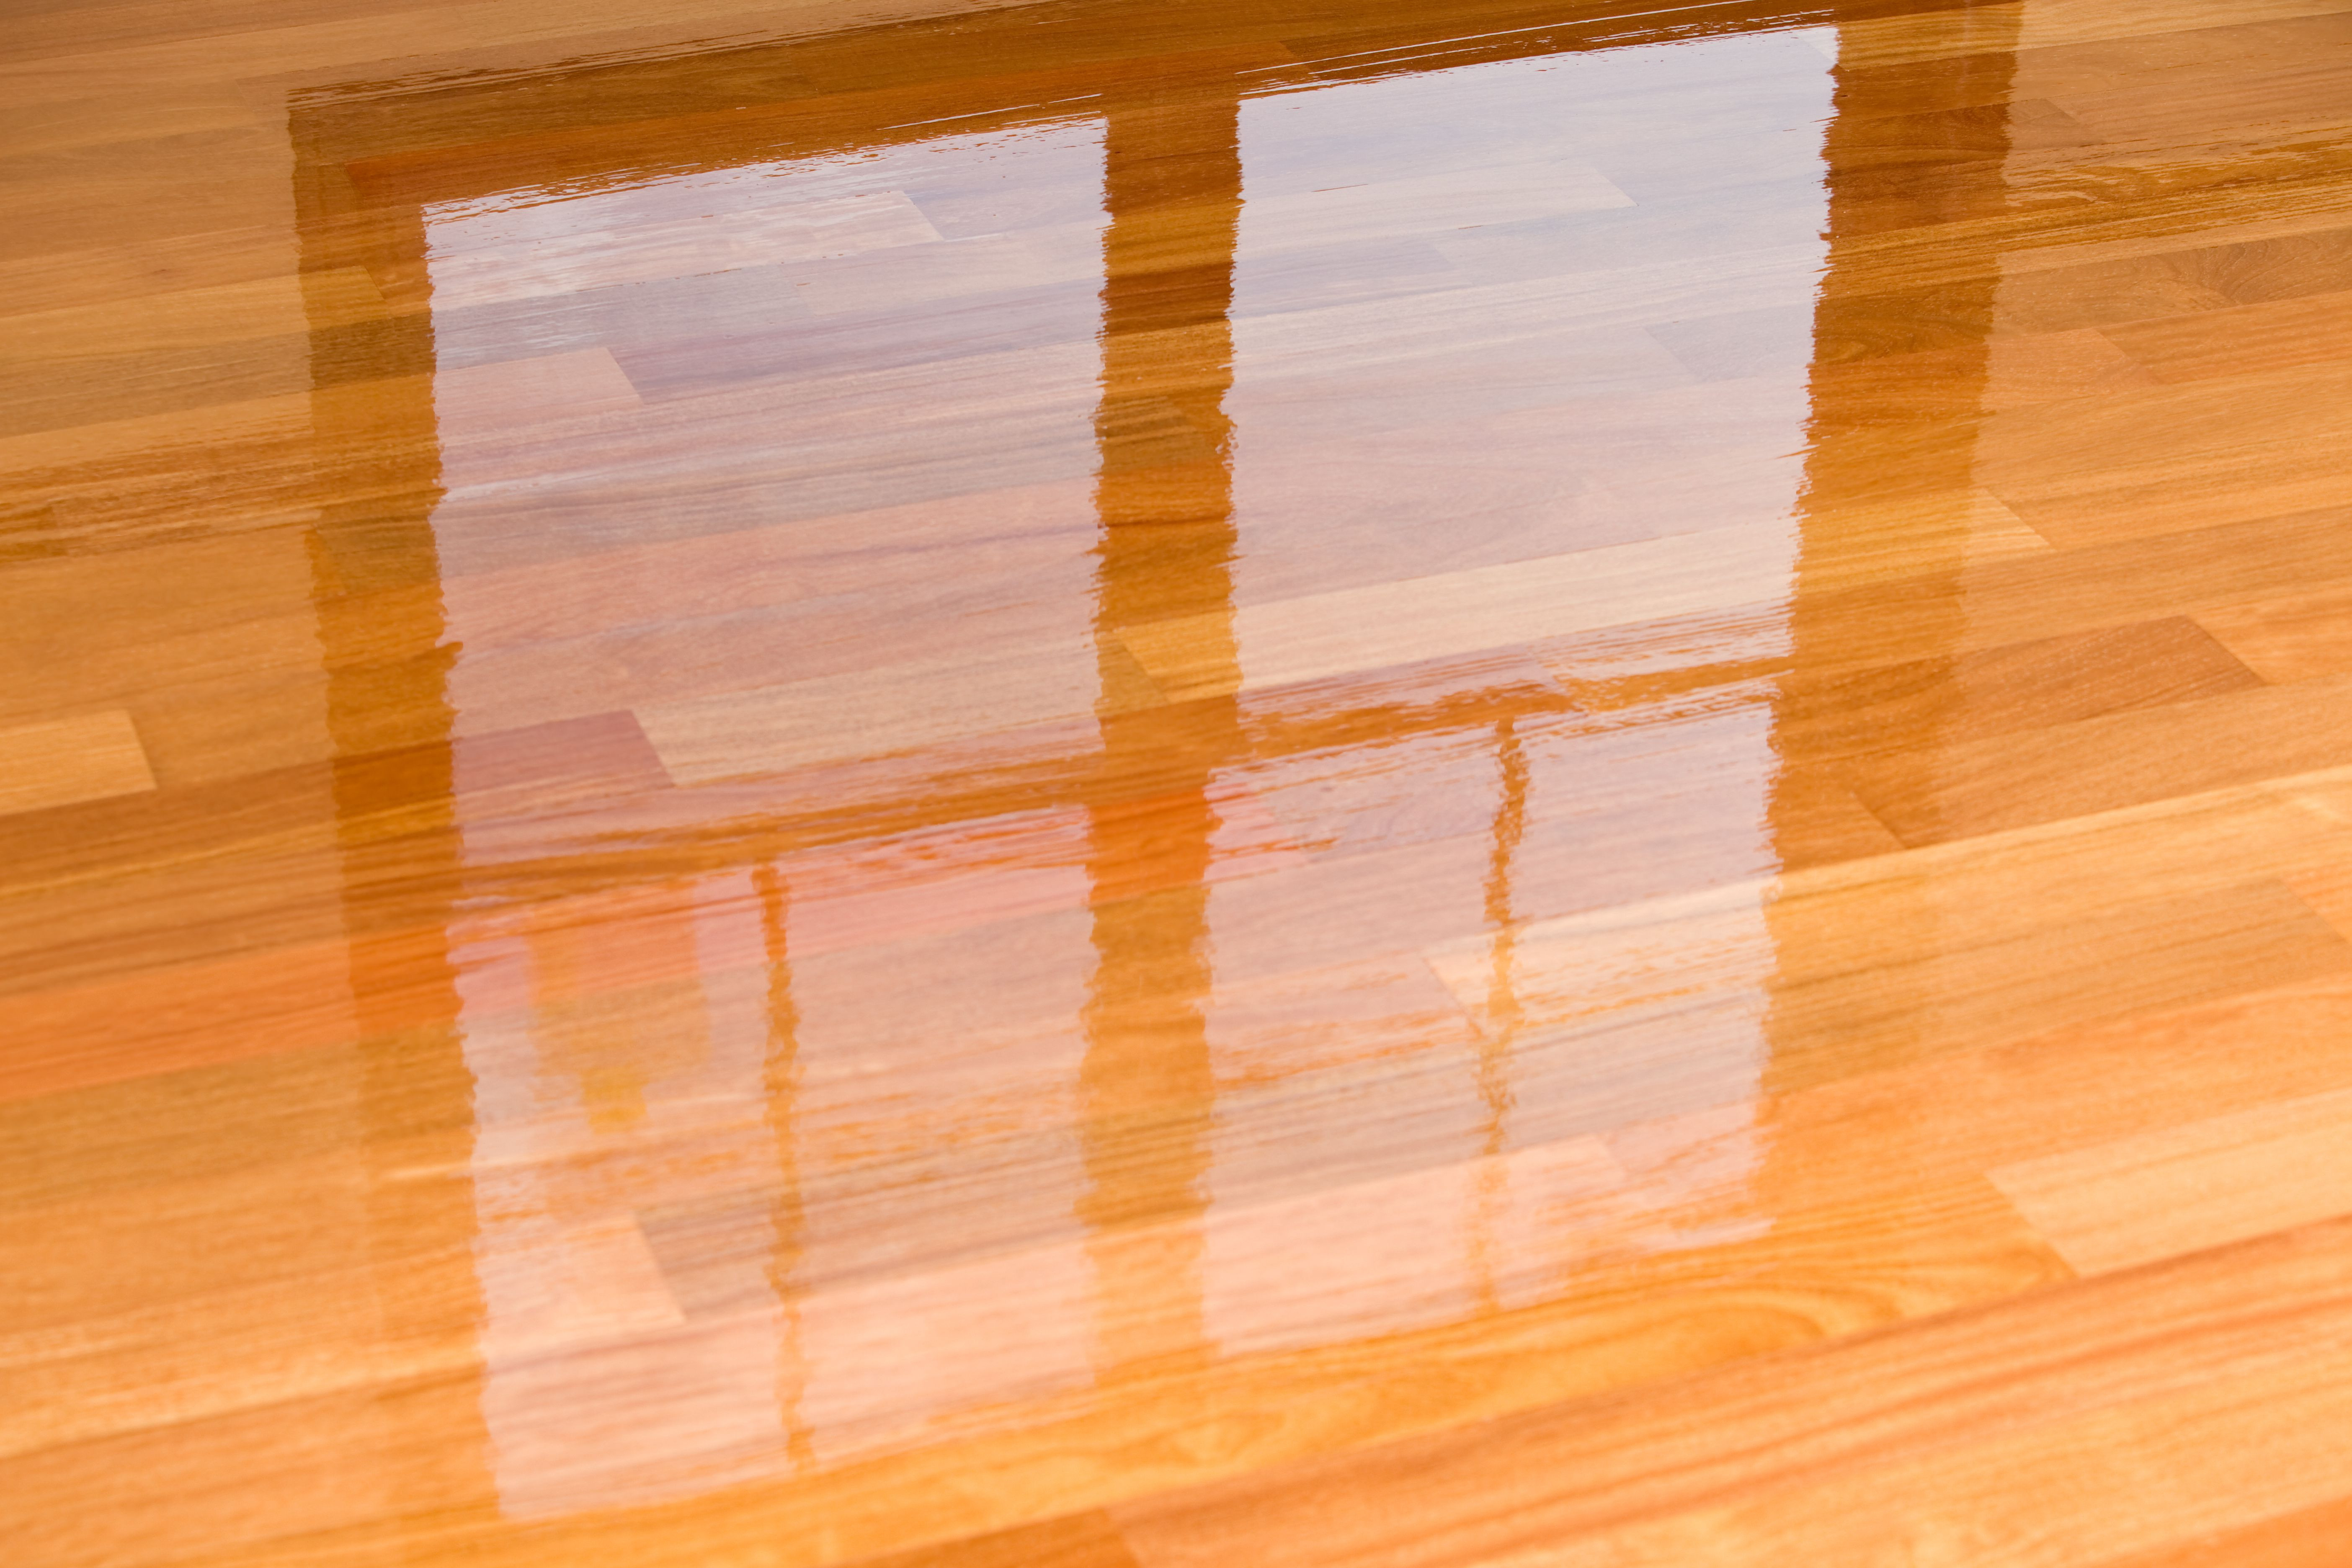 17 Unique 5 Inch Hardwood Flooring Cupping 2024 free download 5 inch hardwood flooring cupping of guide to laminate flooring water and damage repair for wet polyurethane on new hardwood floor with window reflection 183846705 582e34da3df78c6f6a403968